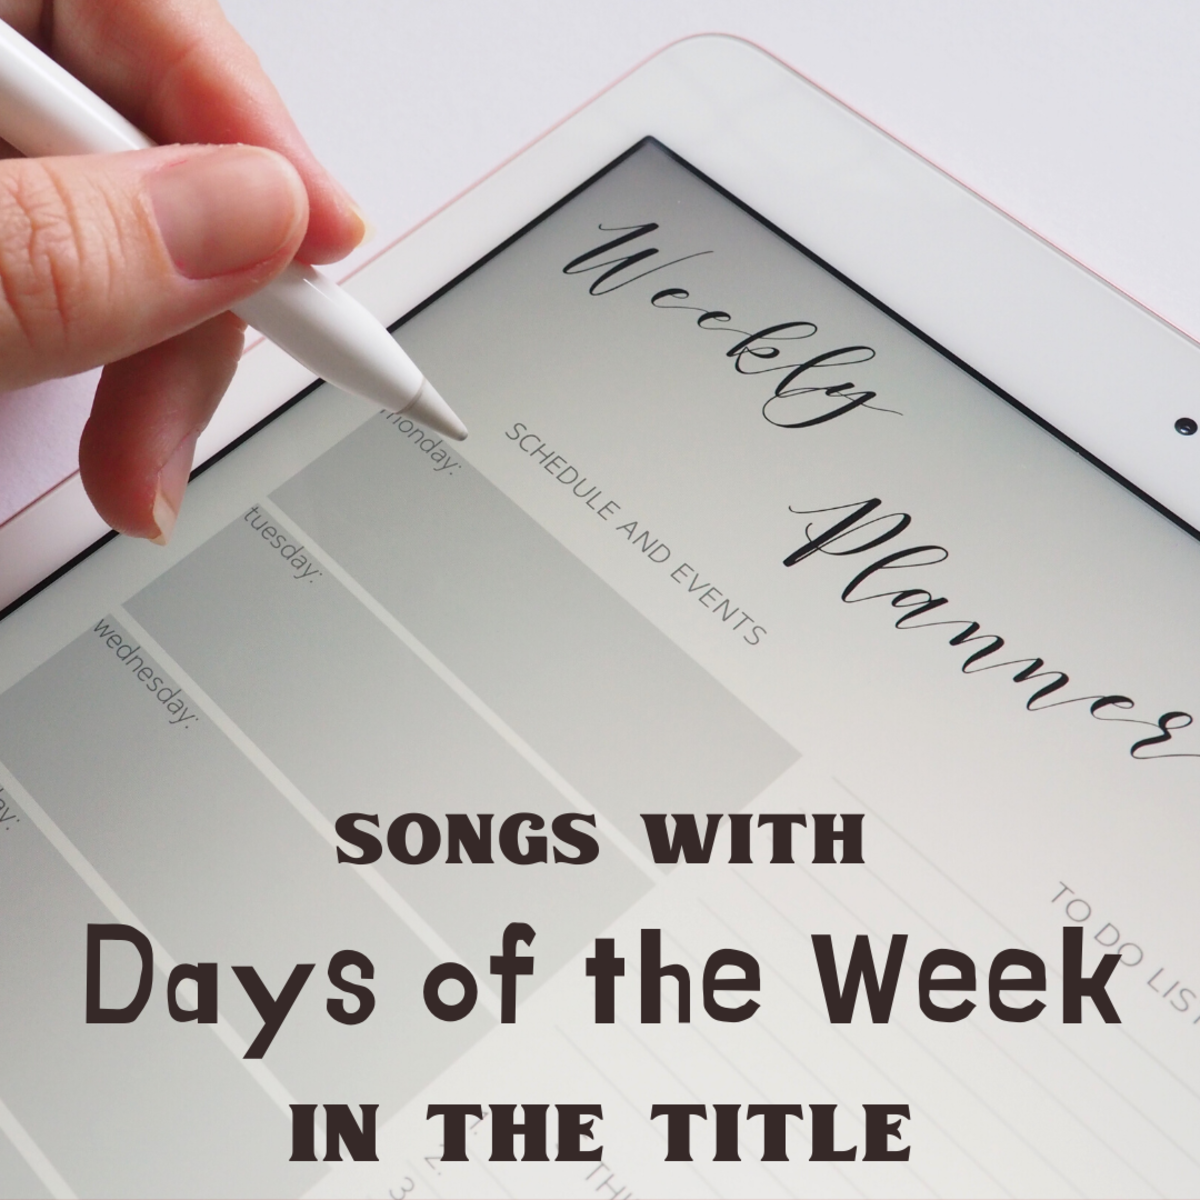 What's your favorite day of the week? Celebrate any day with this playlist!